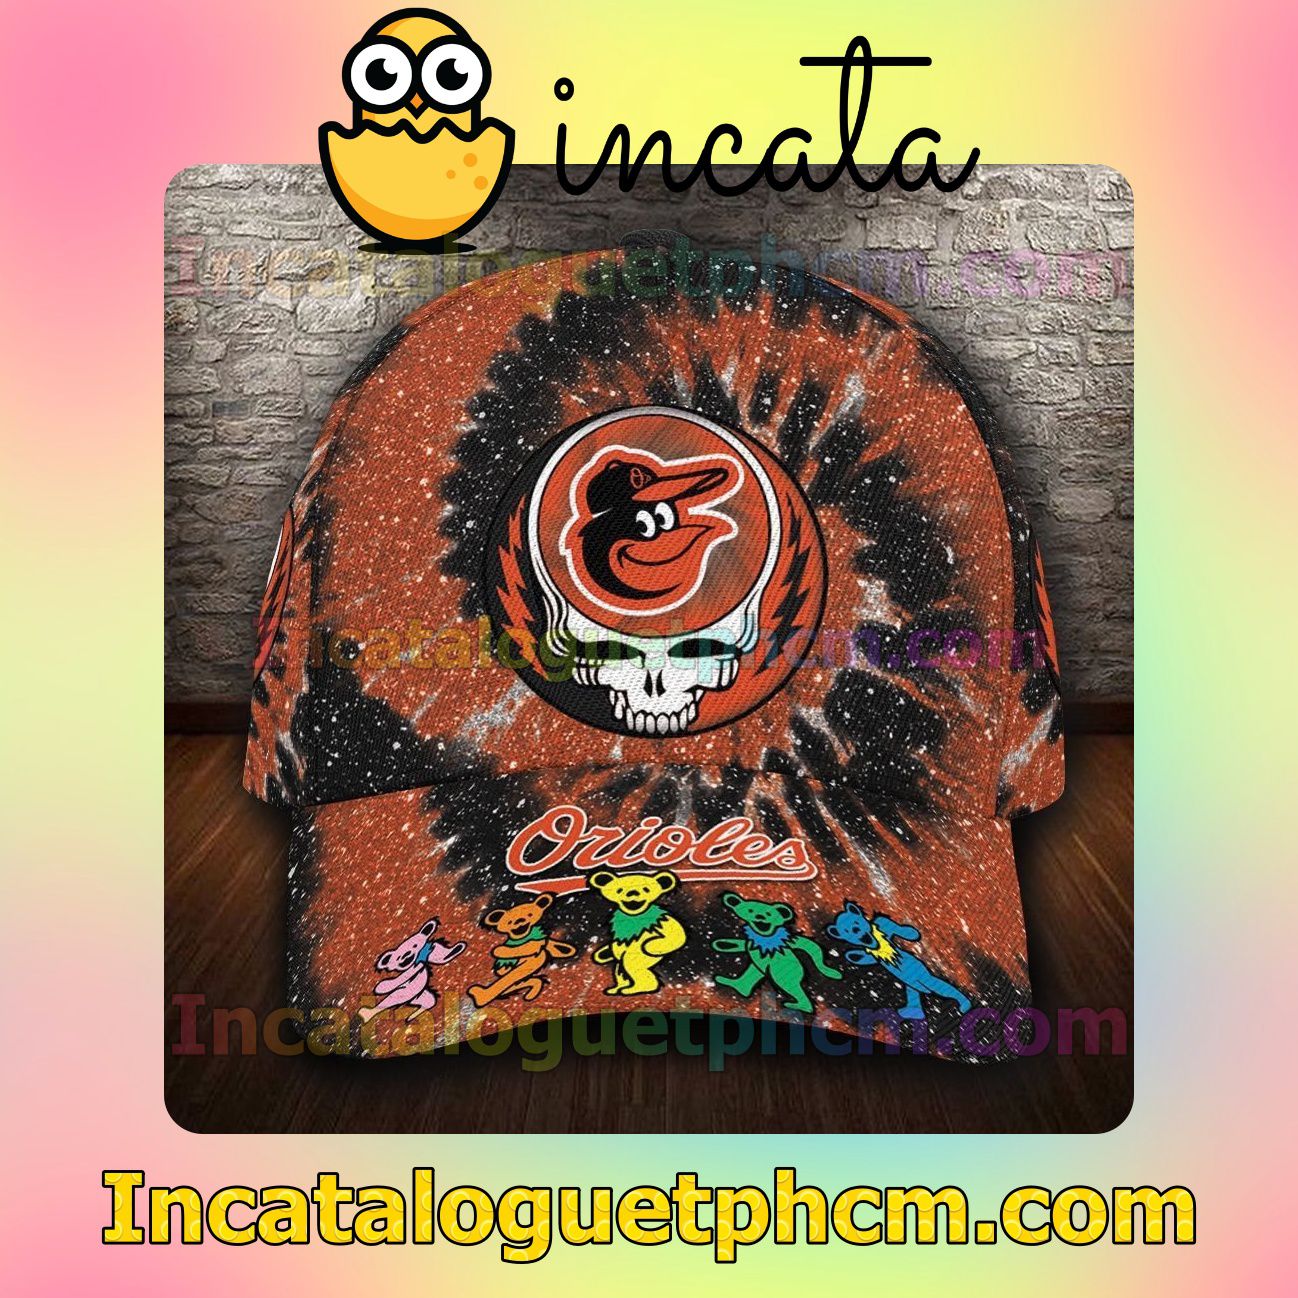 Baltimore Orioles & Grateful Dead Band MLB Customized Hat Caps